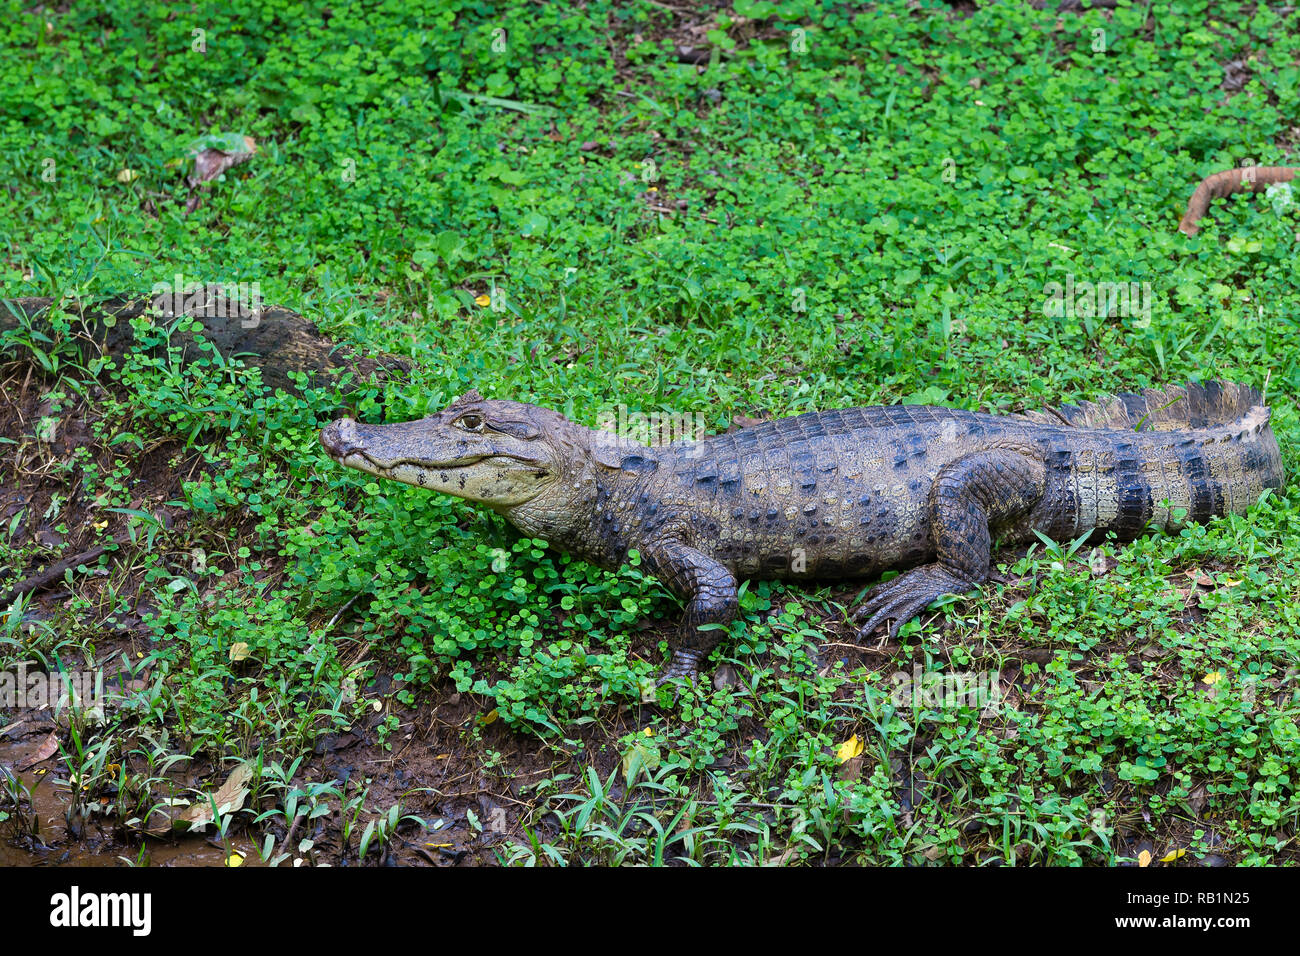 Spectacled caiman, Costa Rica rainforest Stock Photo